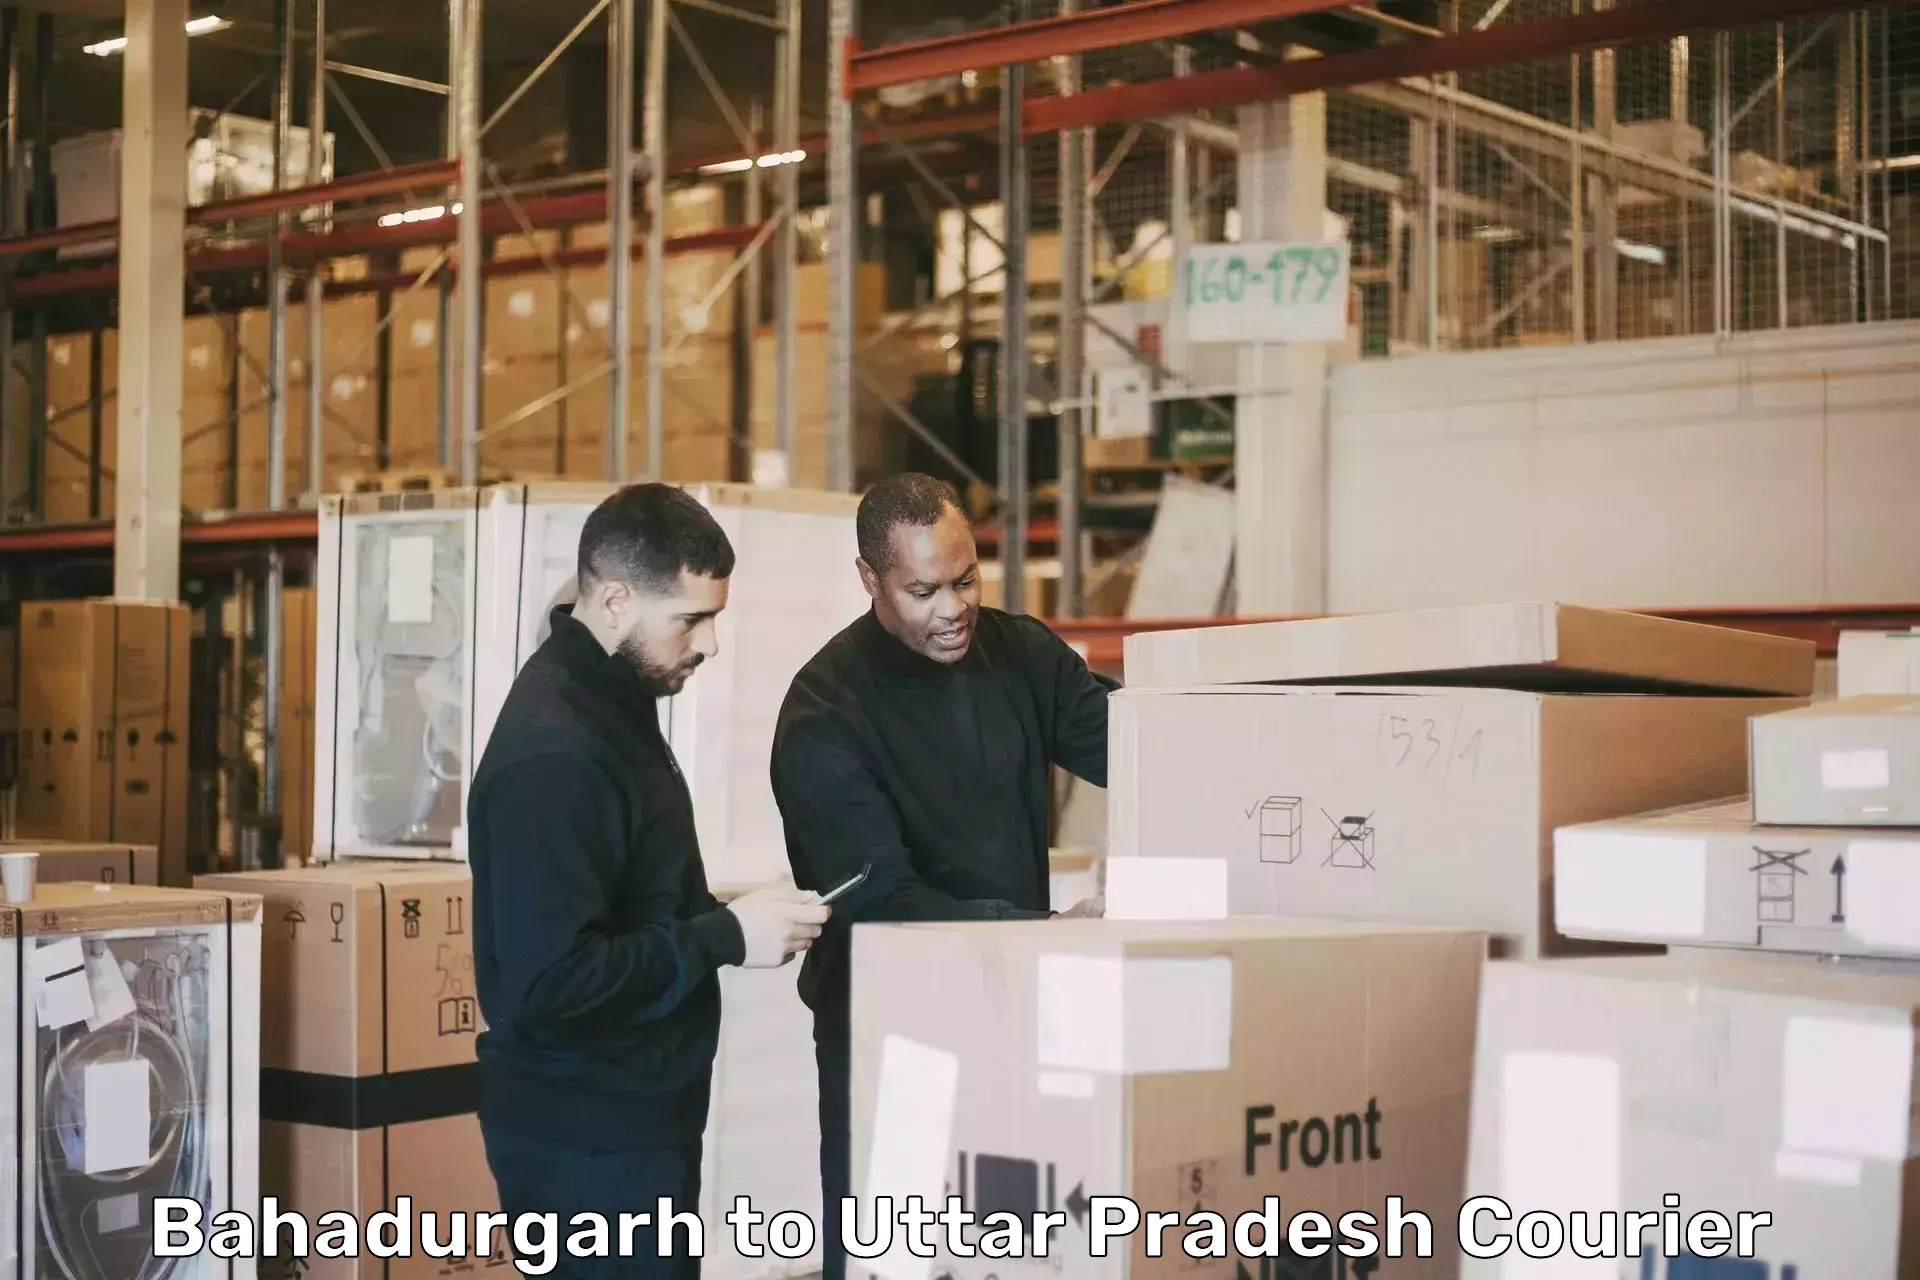 Trusted moving company Bahadurgarh to Kanpur